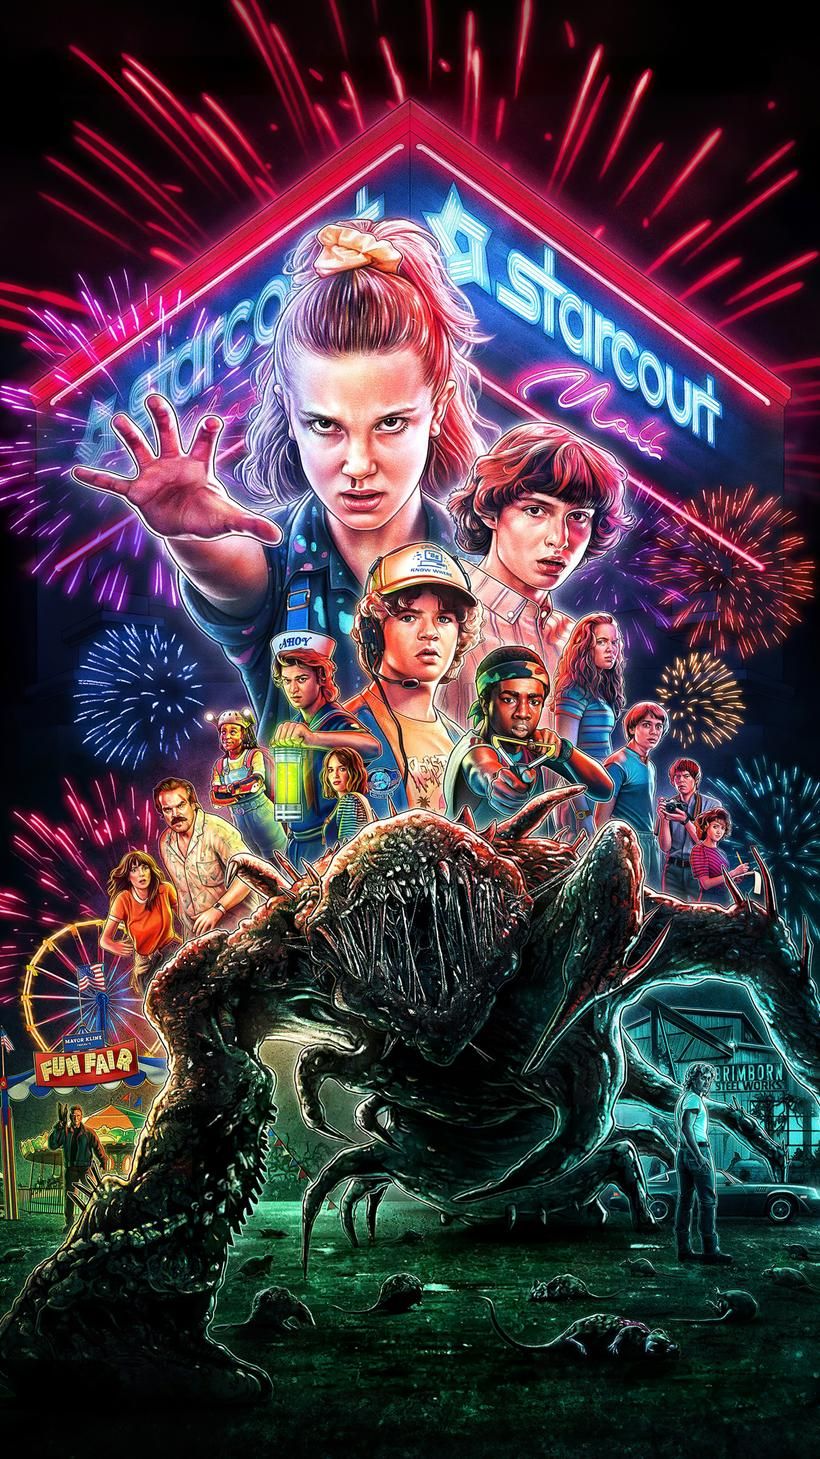 Cartoon Image Of All Of The Characters In Neon Colors, - Stranger Things , HD Wallpaper & Backgrounds